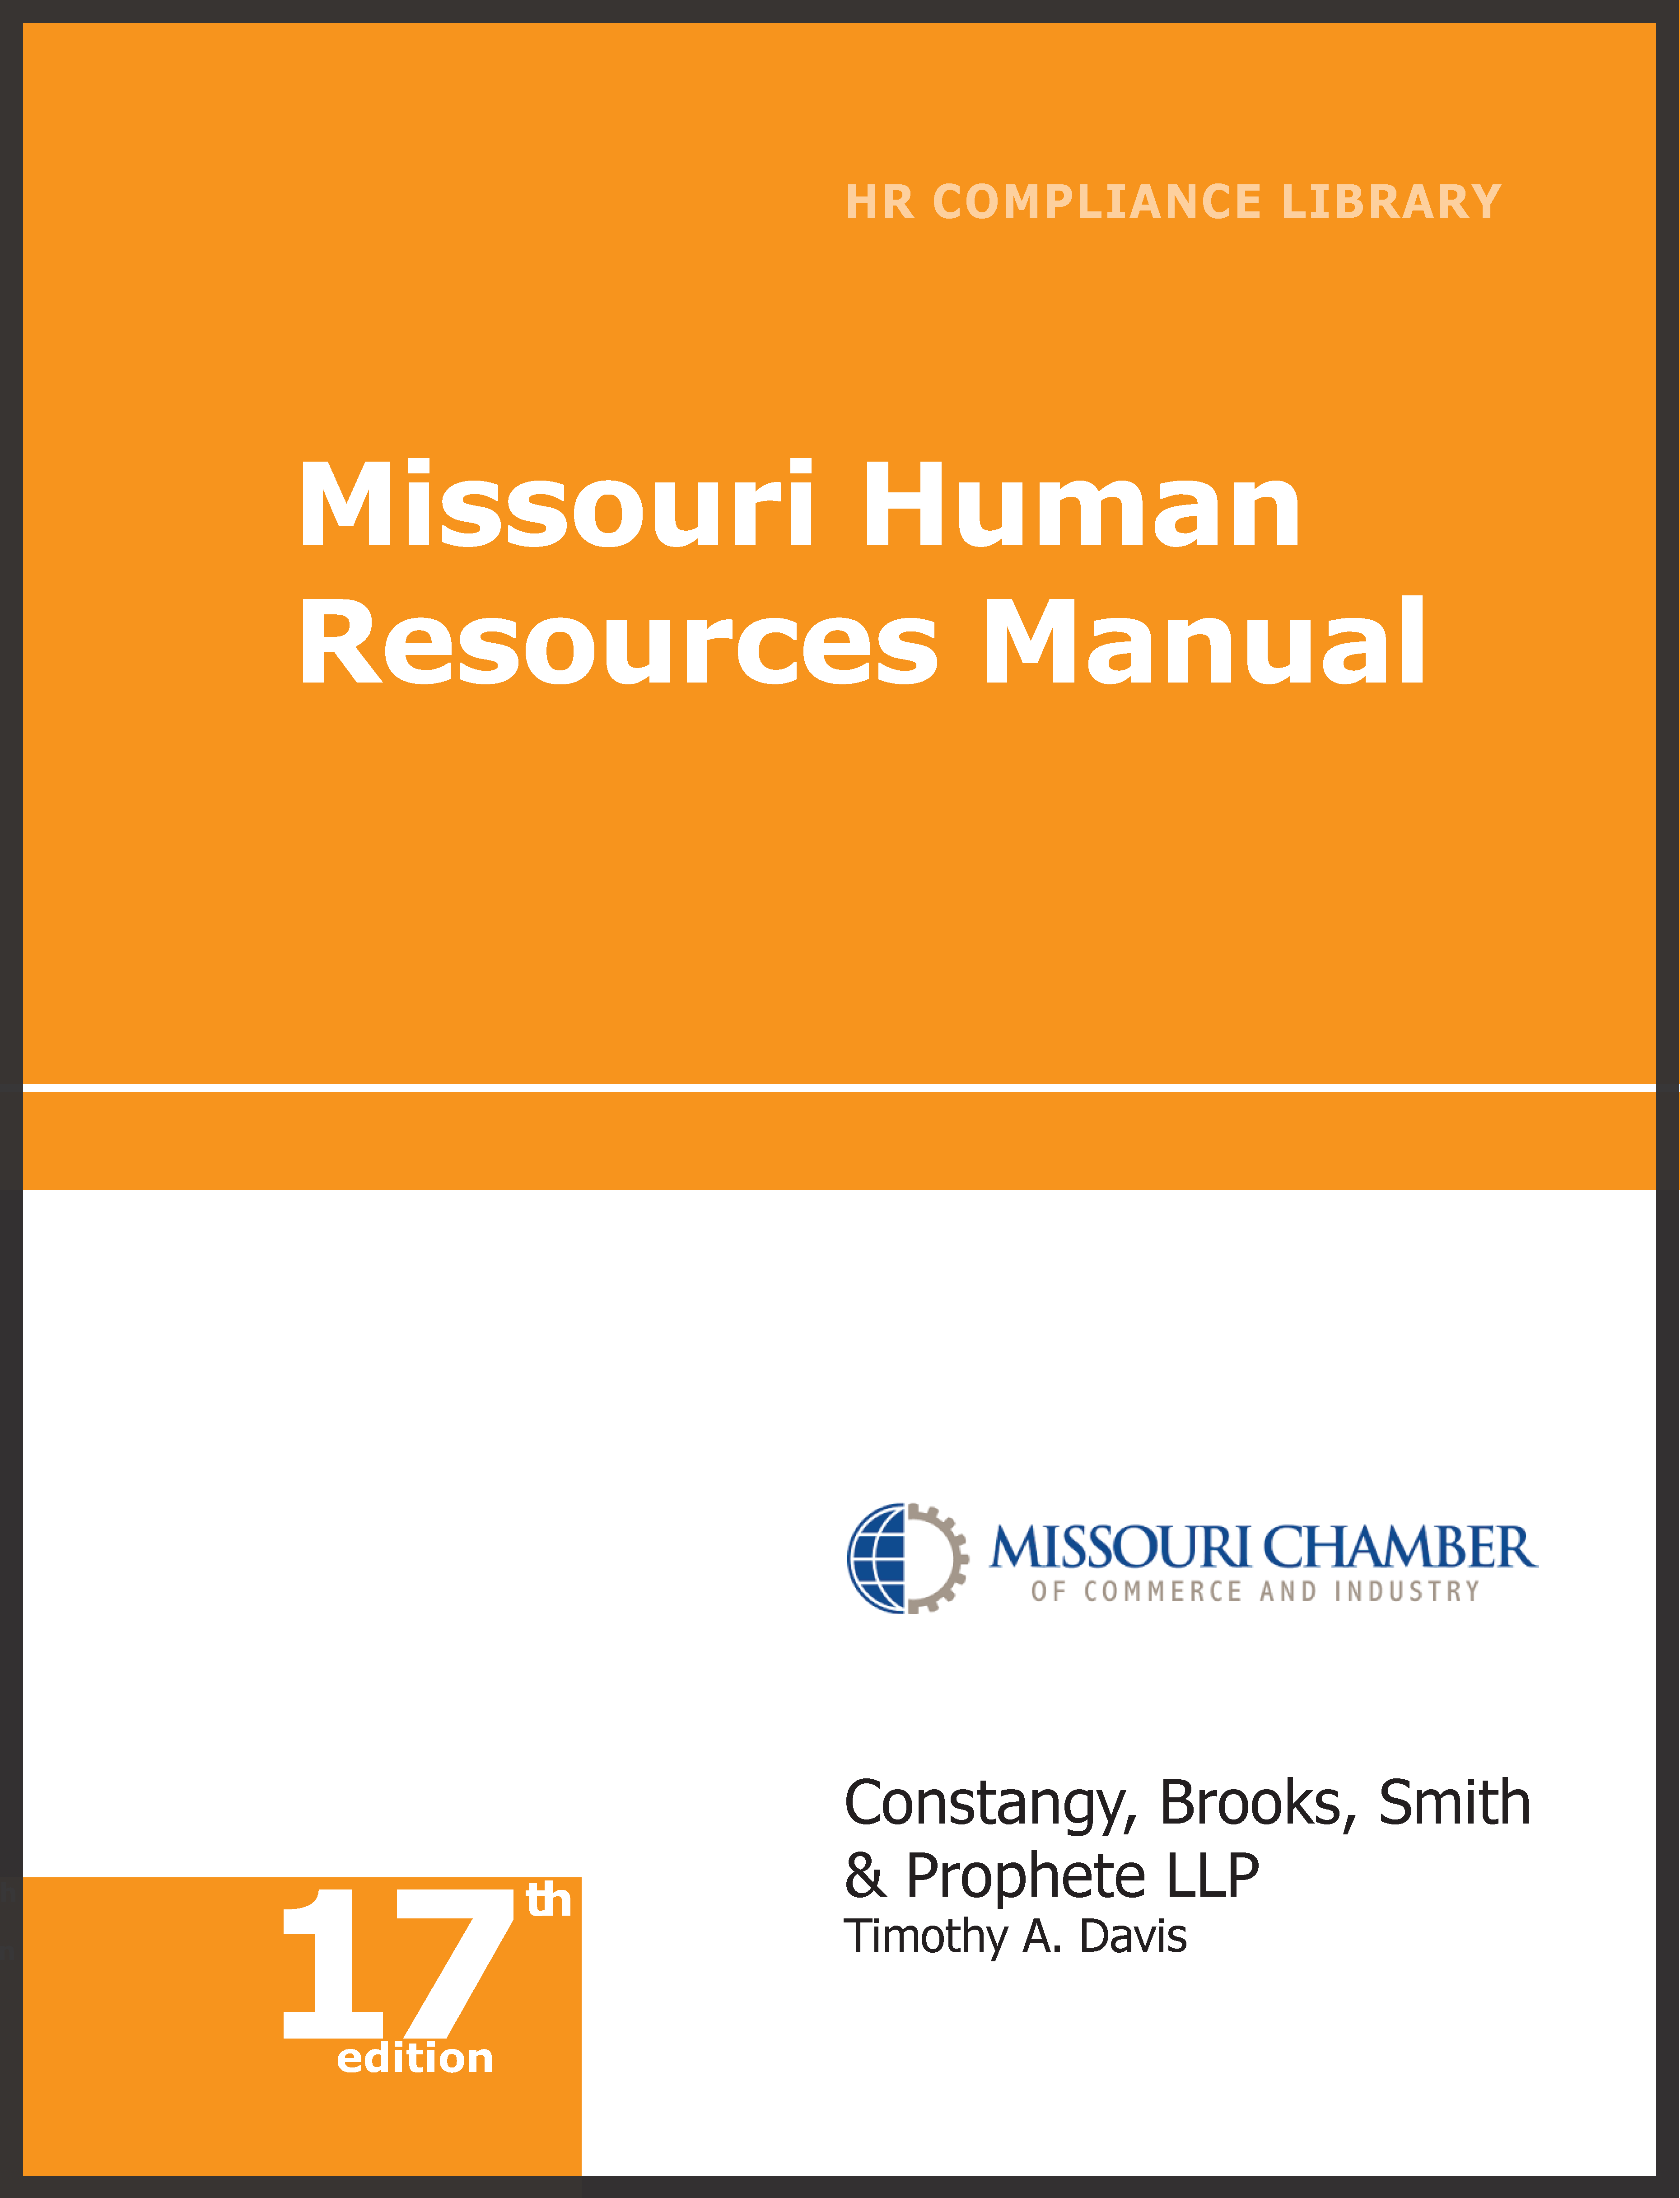 Missouri Human Resources Library employment law image, remote work, labor laws, employment laws, right to work, order of protection, minimum wage